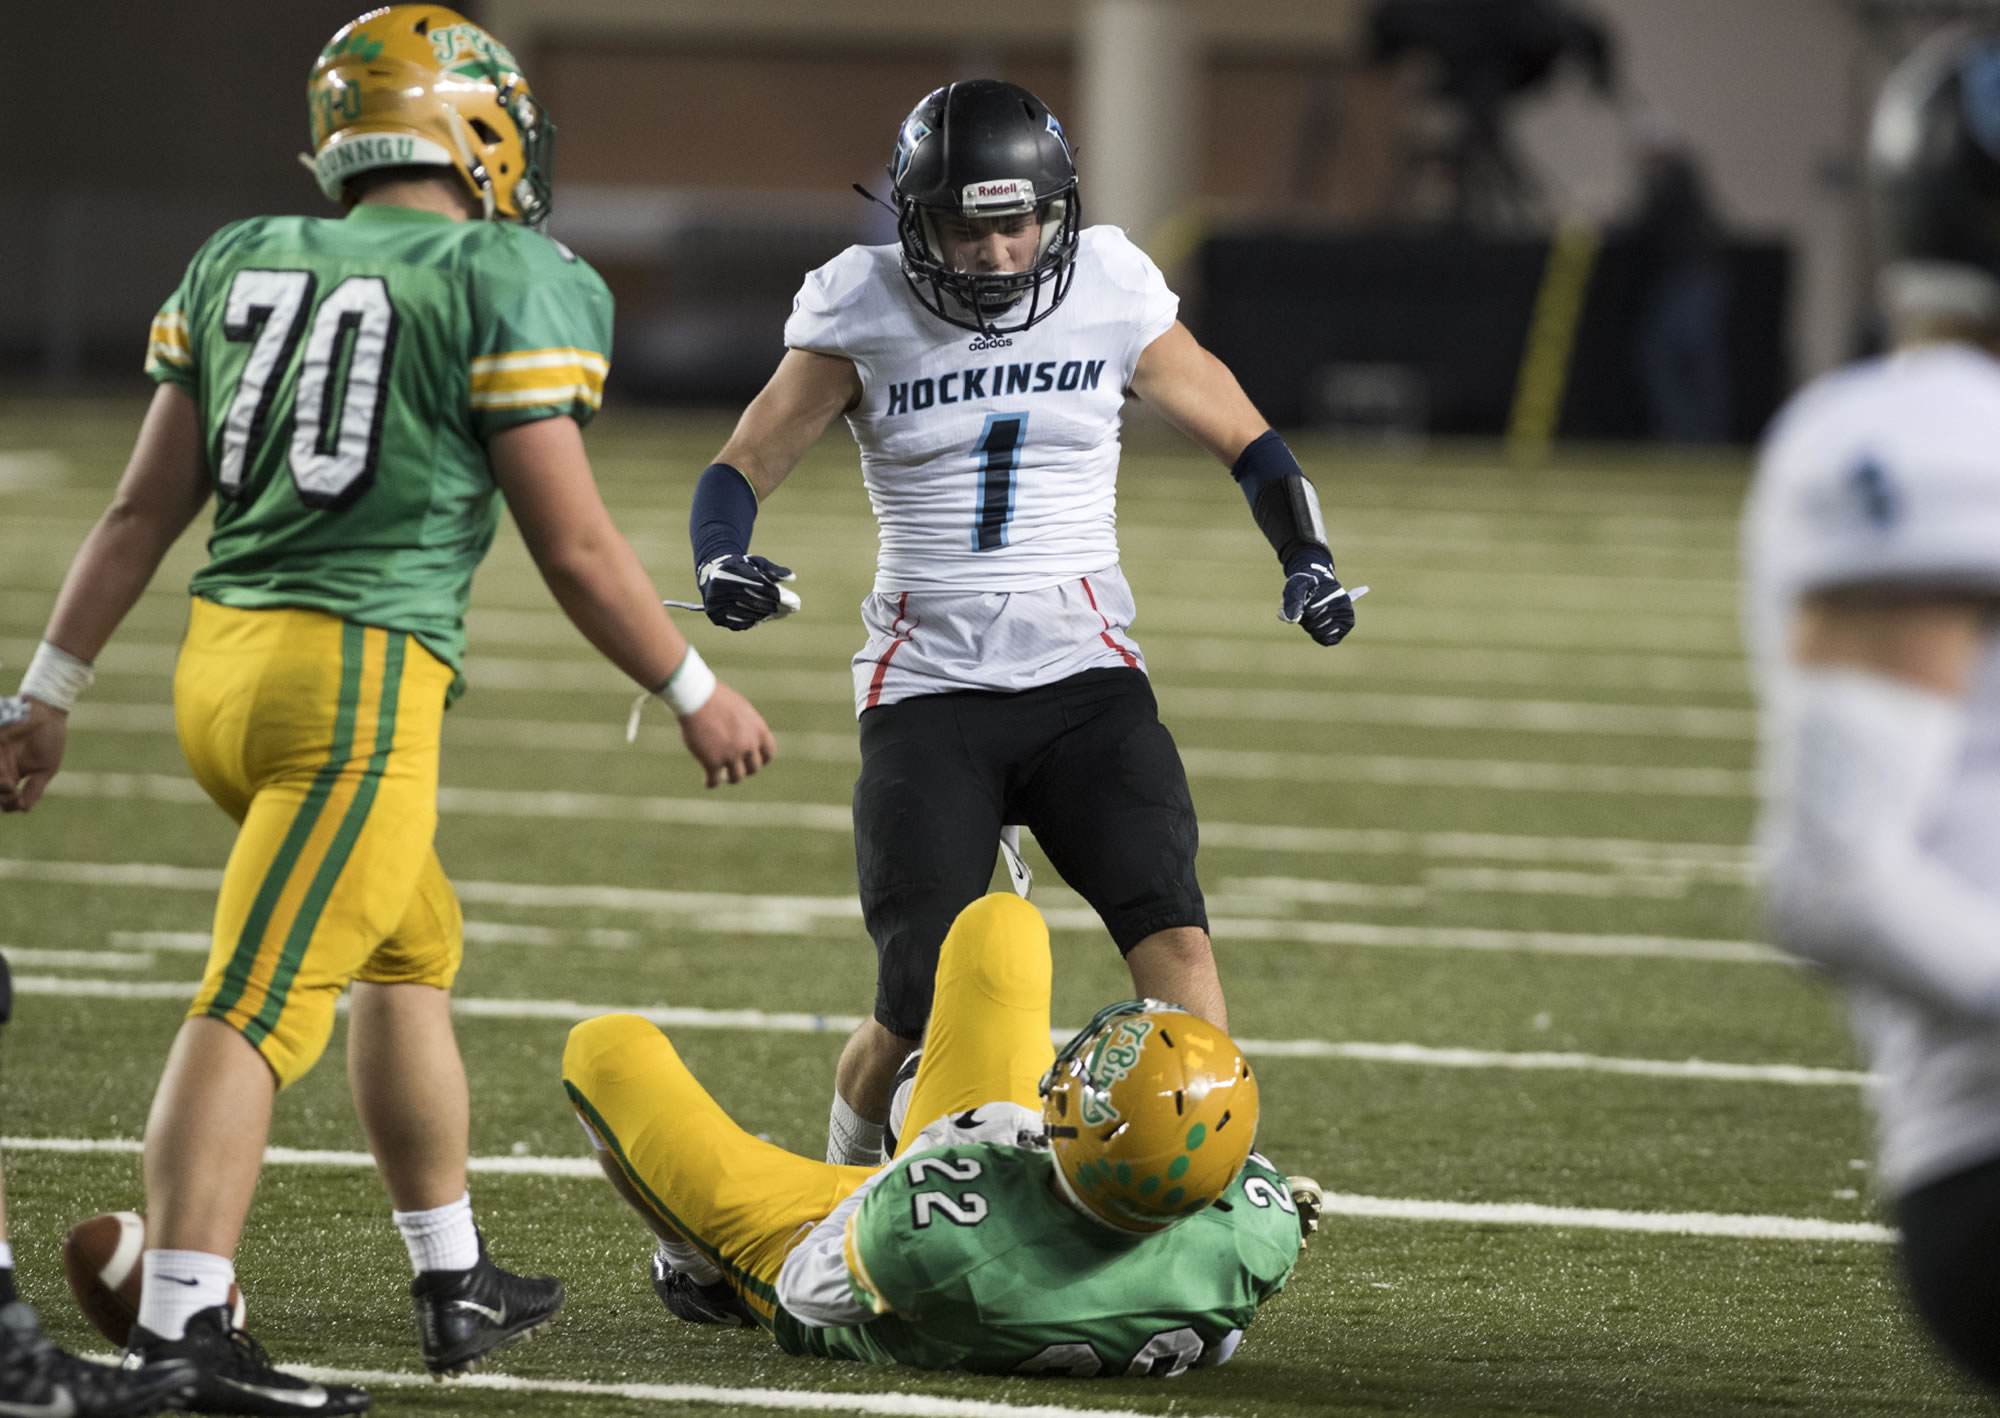 Hockinson's Aidan Mallory (1) celebrates a tackle against Tumwater's Jakob Holbrook (22) during the 2A State Football Championship game Saturday, Dec. 2, 2017, in Tacoma, Wash.